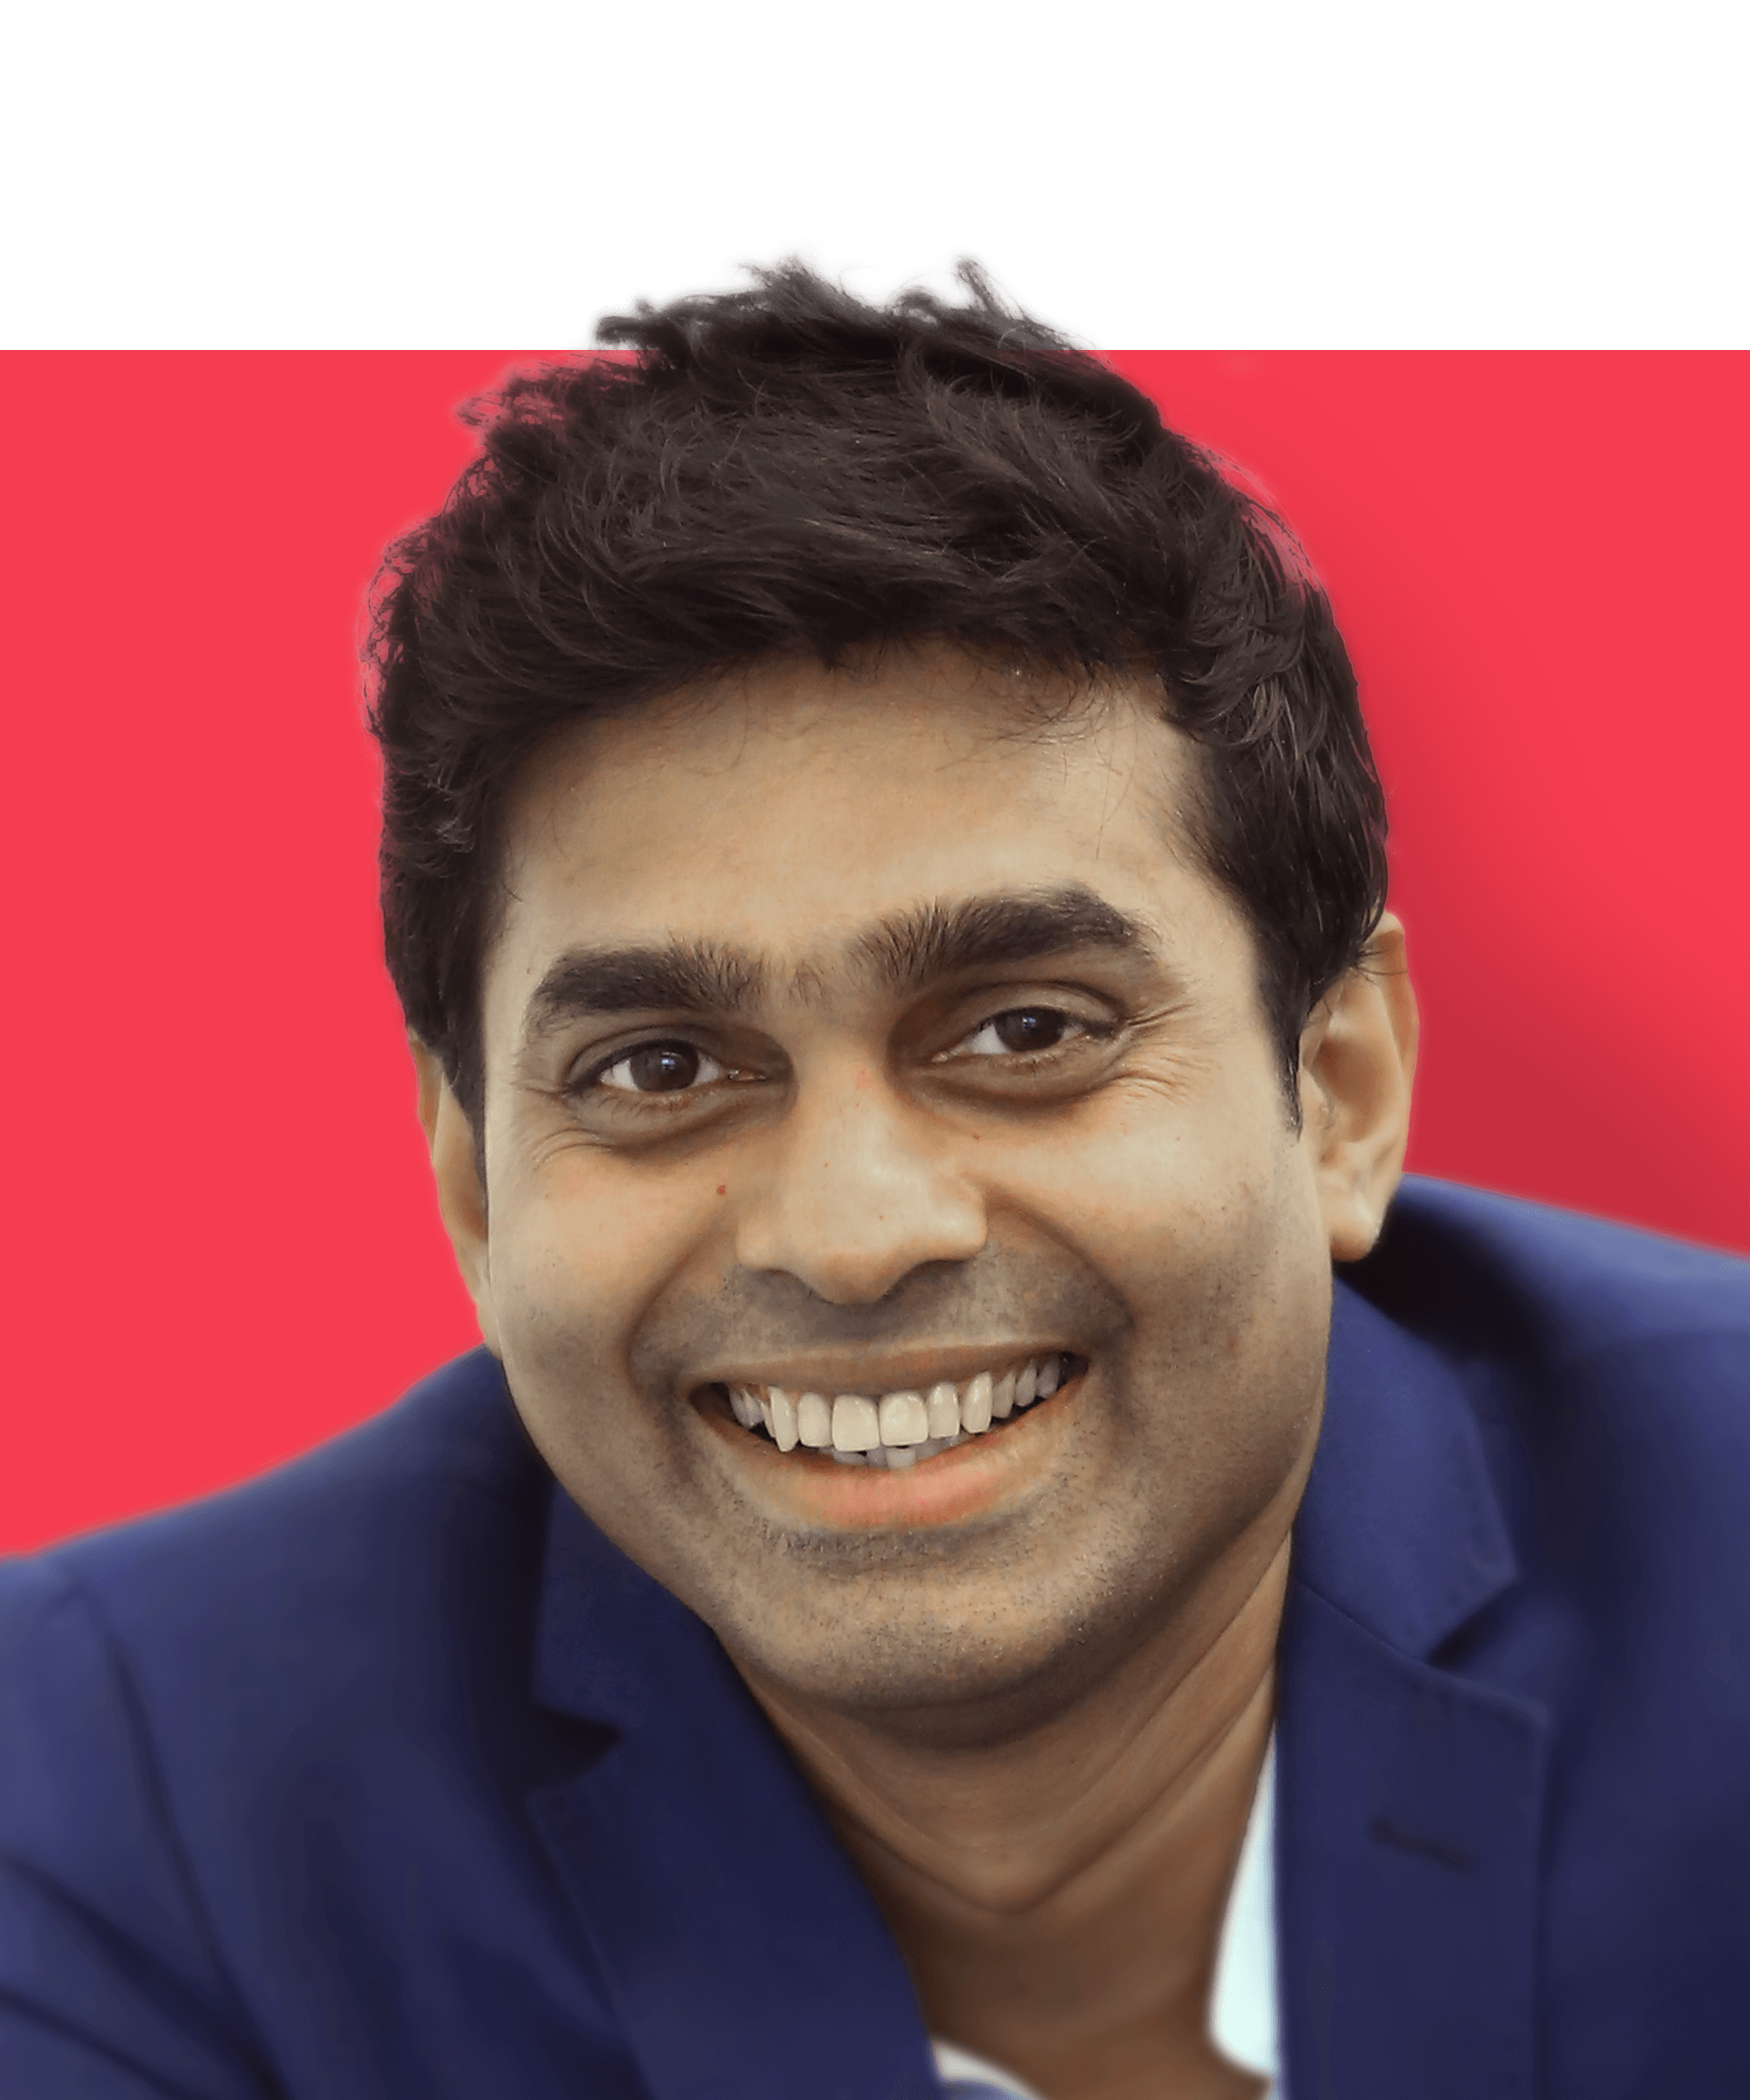 Head shot of Managing Director of India Shashikant Someshwar (Shashi). He is an Indian man with short dark hair and brown eyes. He is wearing a dark blue jacket as he smiles at the camera.